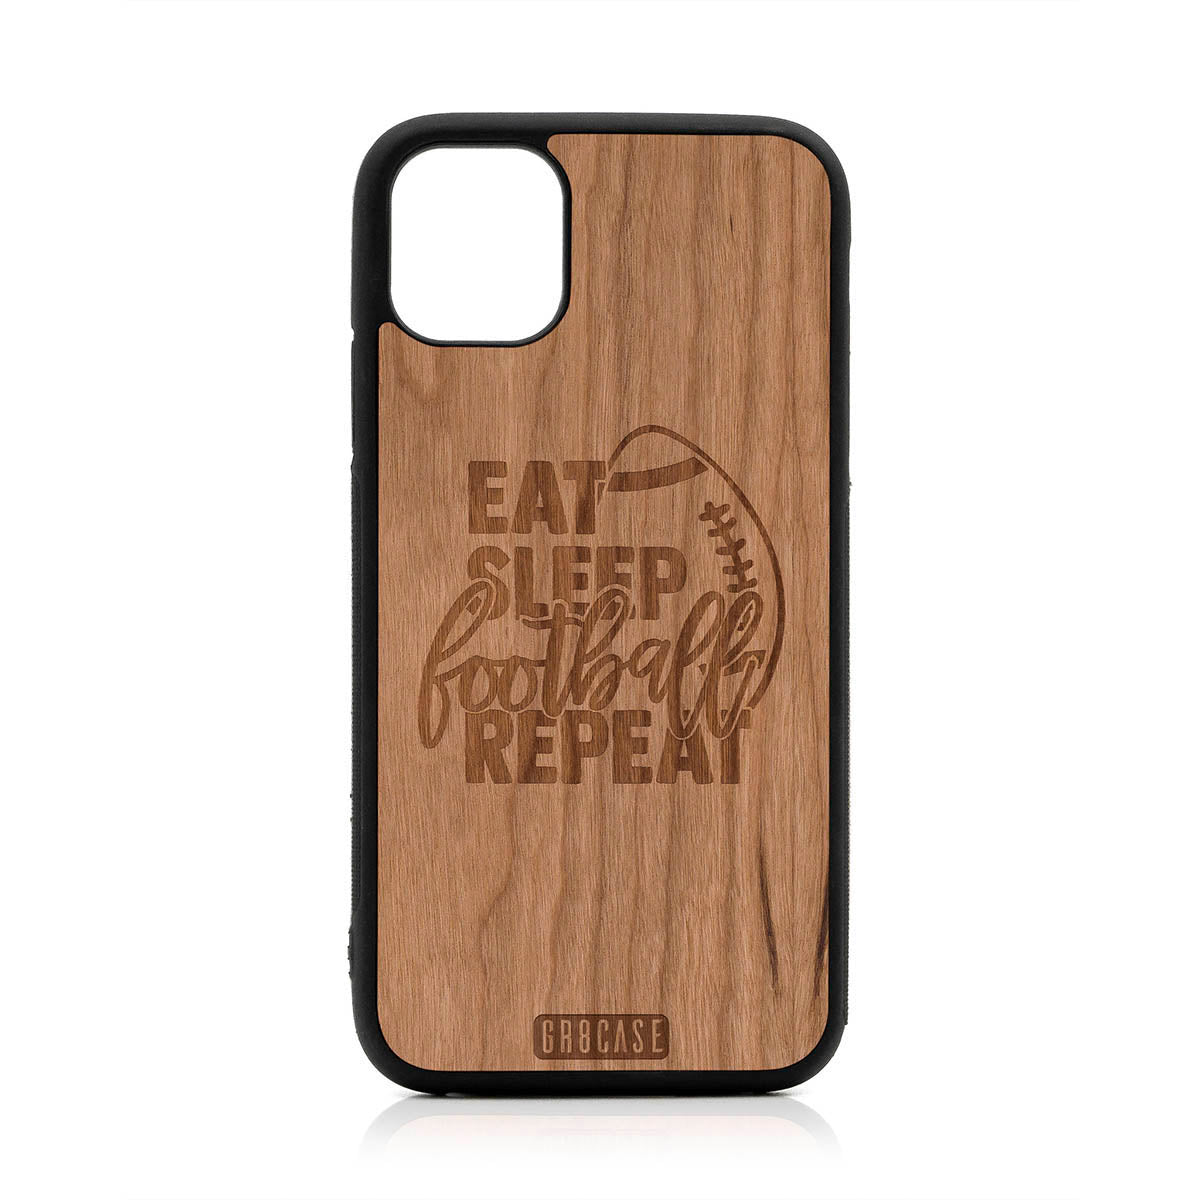 Eat Sleep Football Repeat Design Wood Case For iPhone 11